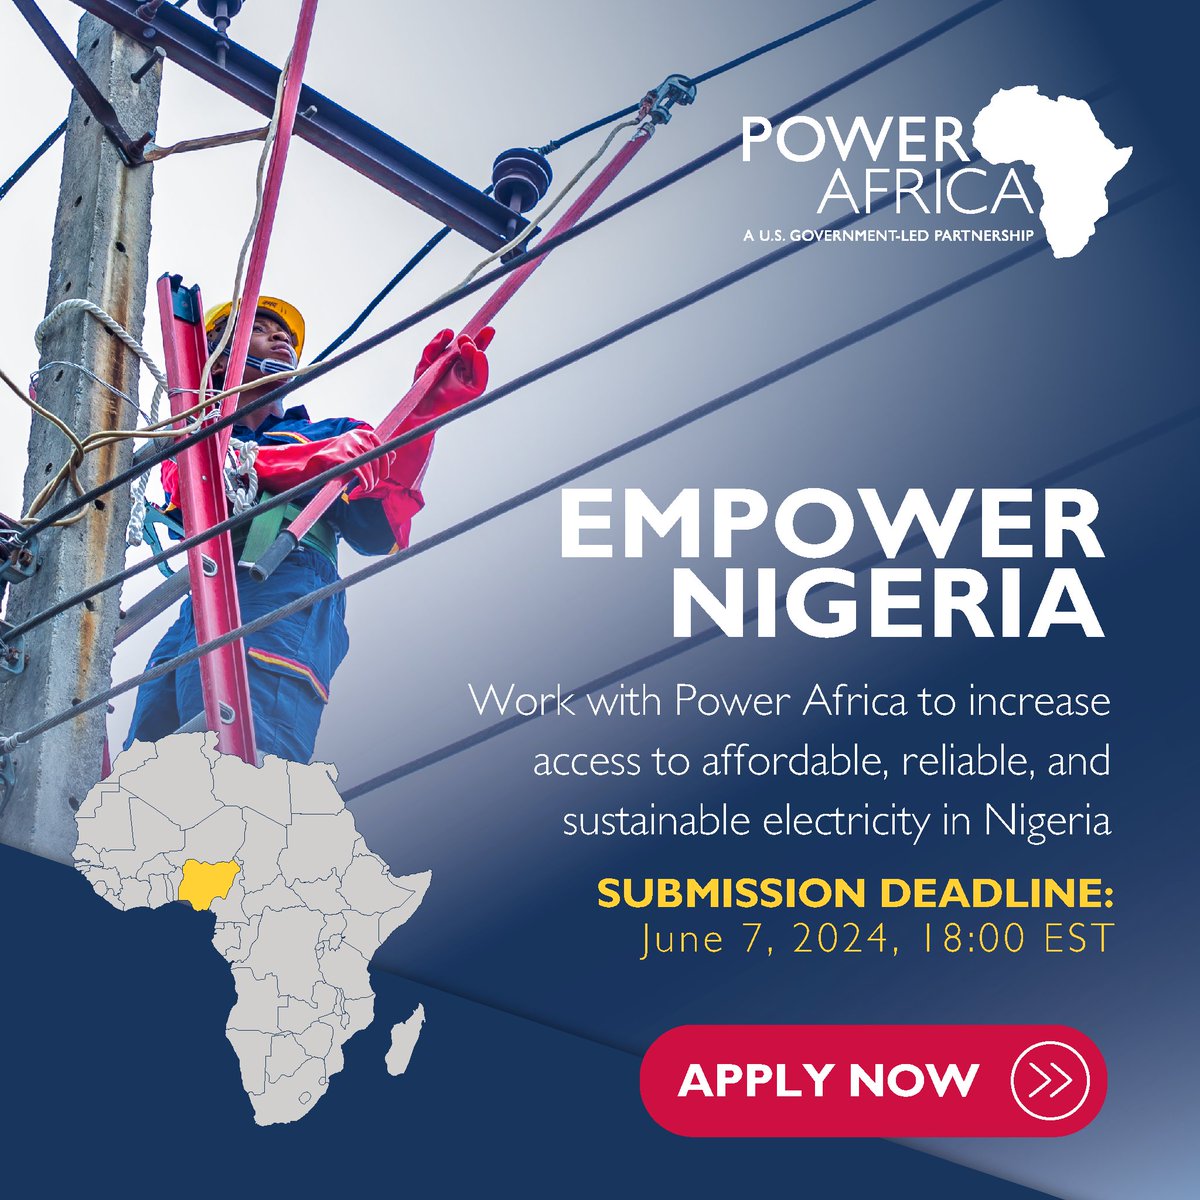 REQUEST FOR PROPOSAL 📢 Work with @PowerAfricaUS to increase #EnergyAccess in Nigeria! Details here: ow.ly/npR750RA201 ❓Questions deadline: May 17, 2024 ❗️Submission deadline: June 7, 2024 @WorkwithUSAID @AfricaMediaHub @USAIDWestAfrica @USAIDNigeria #EmpowerNigeria